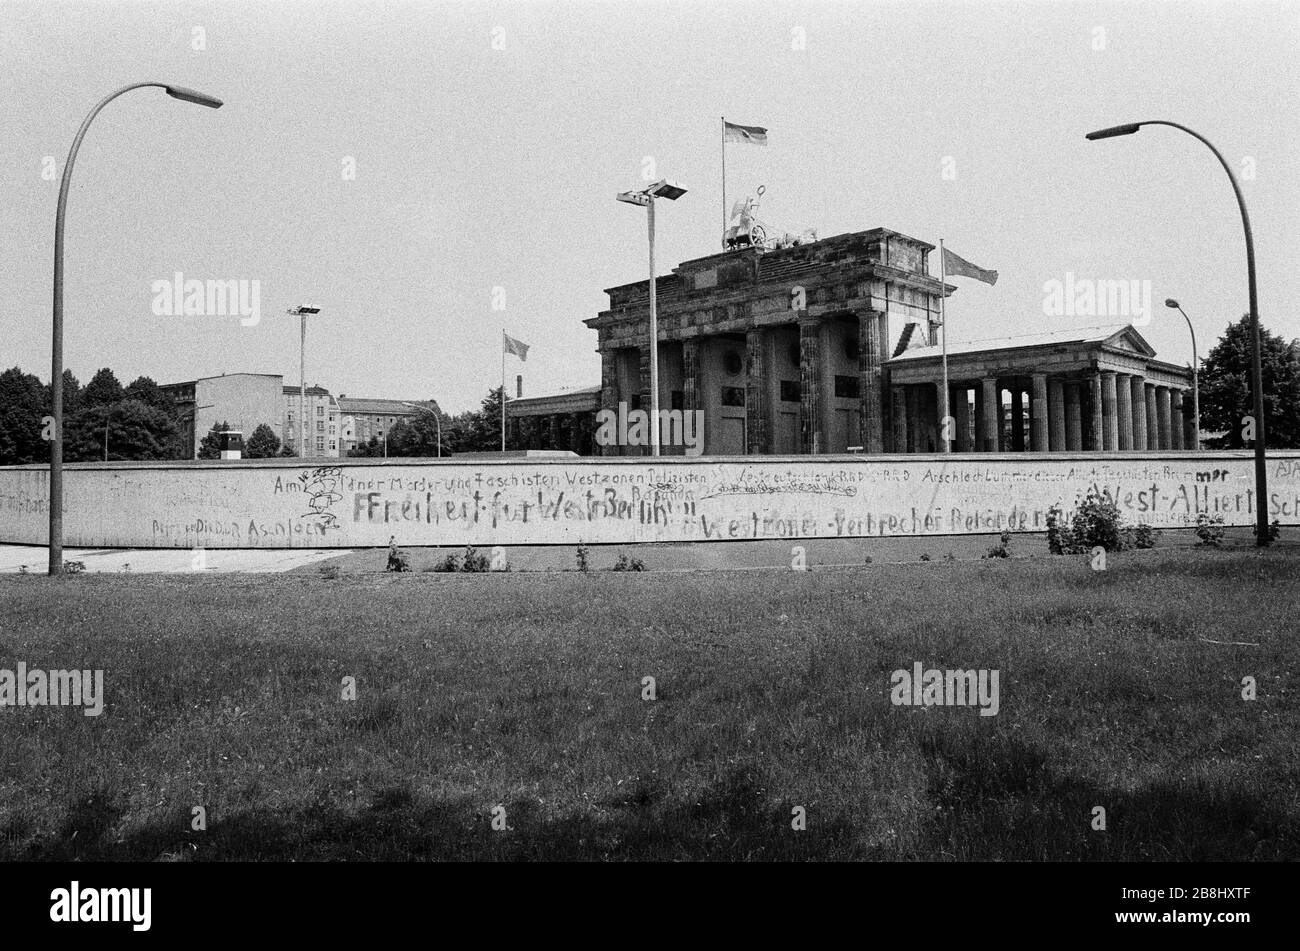 The section of the Berlin Wall at the Brandenburg Gate, seen from the western side of the divide. The Berlin Wall was a barrier constructed by the German Democratic Republic (GDR, East Germany) starting on 13 August 1961, that completely cut off West Berlin from surrounding East Germany and from East Berlin. The Wall was opened on 9. November 1989 allowing free movement of people from east to west. Stock Photo